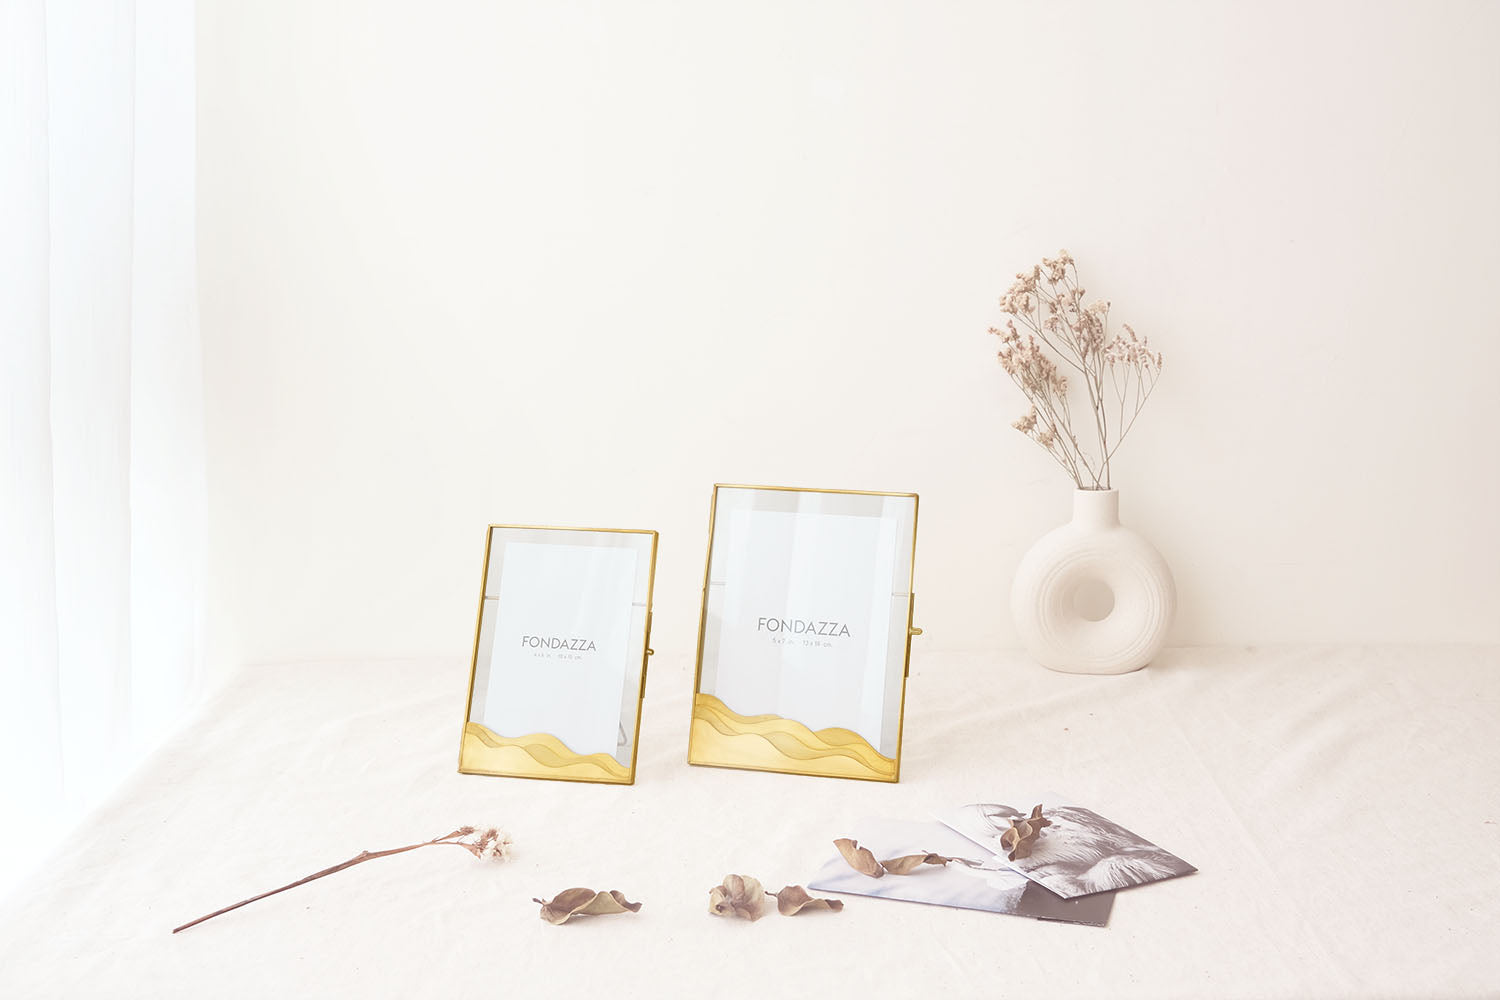 Decorative Photo Frame for 5x7 picture- Brass- Wave Design -The most beautiful home decor items and the best home decorating ideas at FONDAZZA.  